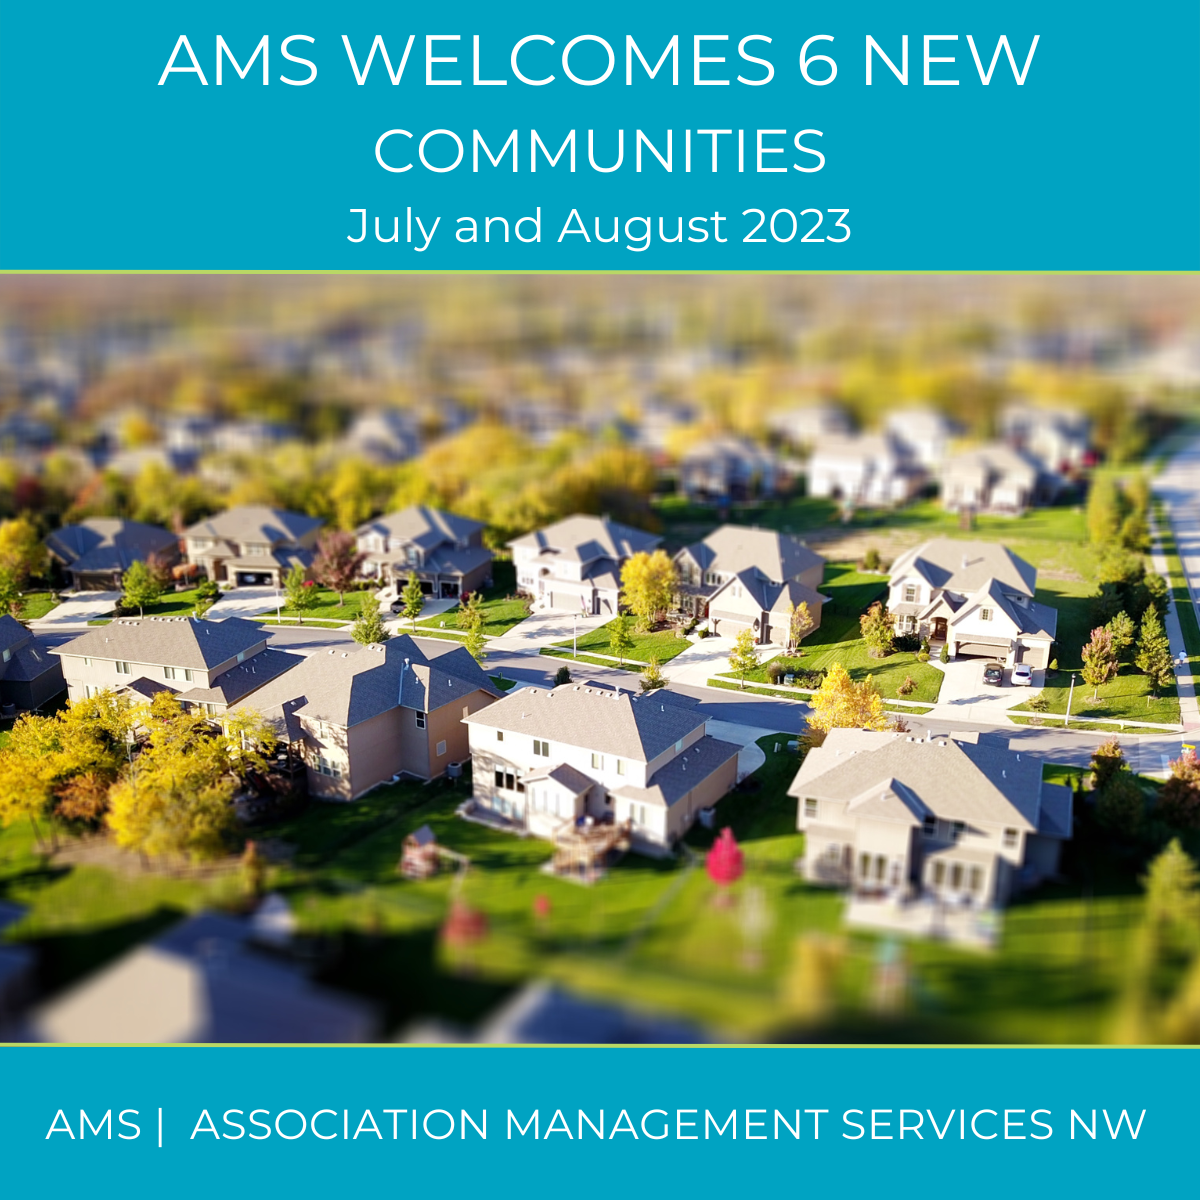 AMS Welcomes 6 new communities in July and August 2023